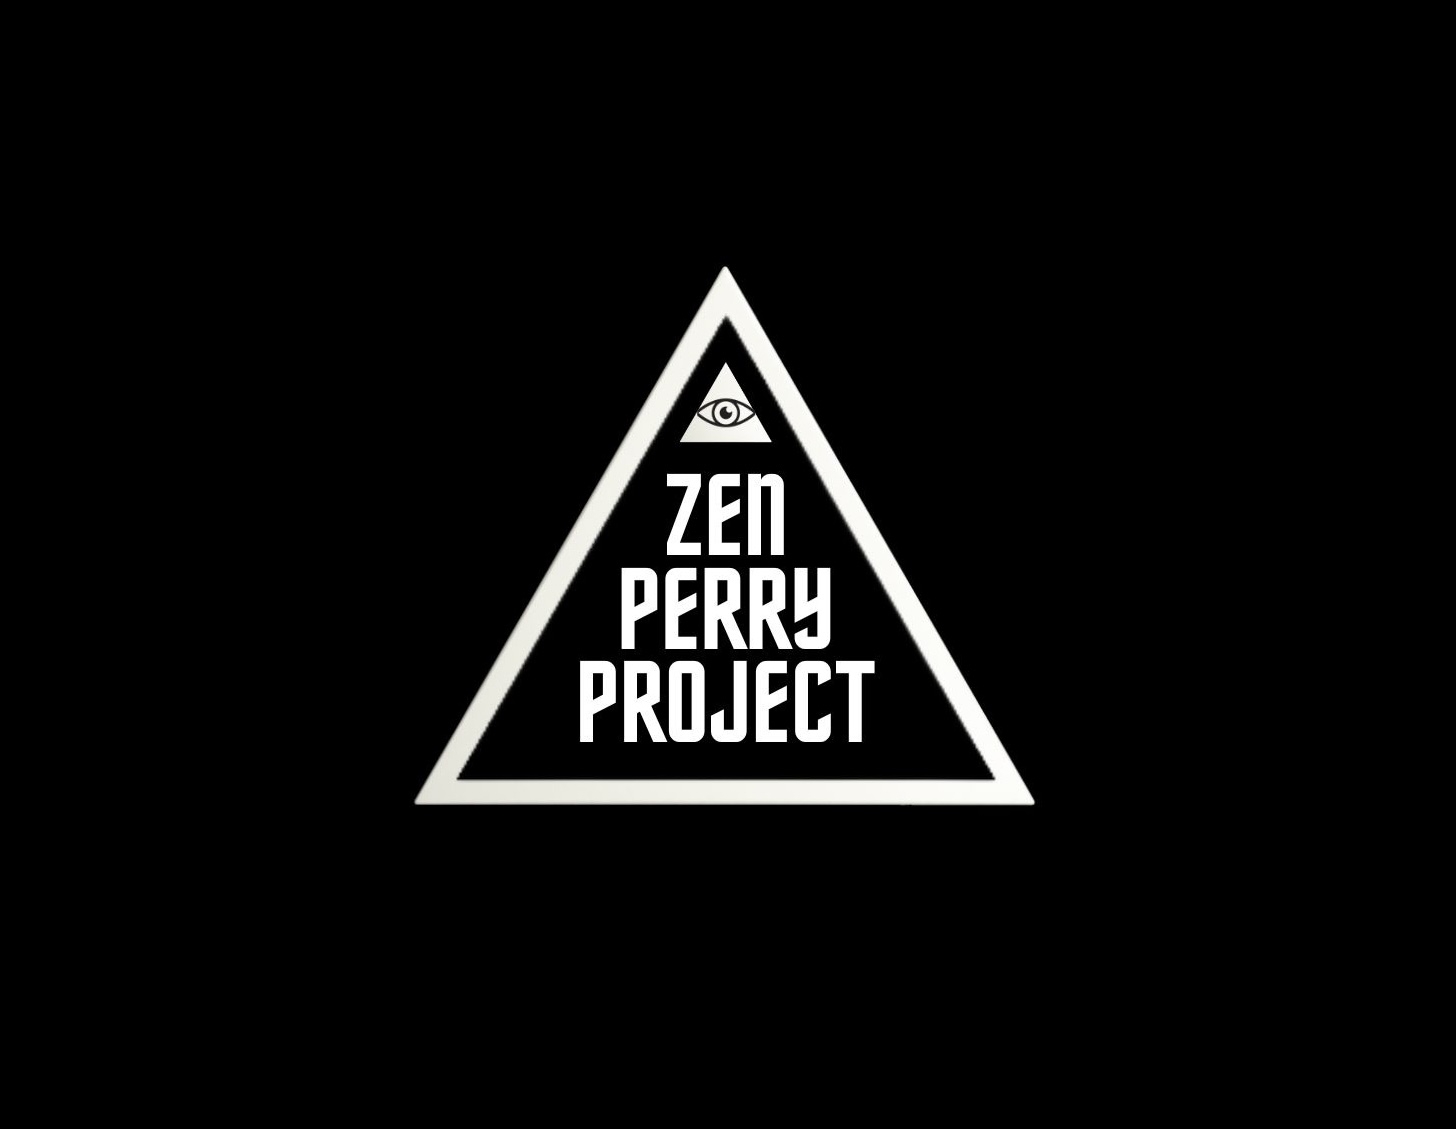 The Zen Perry Project on KPCR 101.9fm